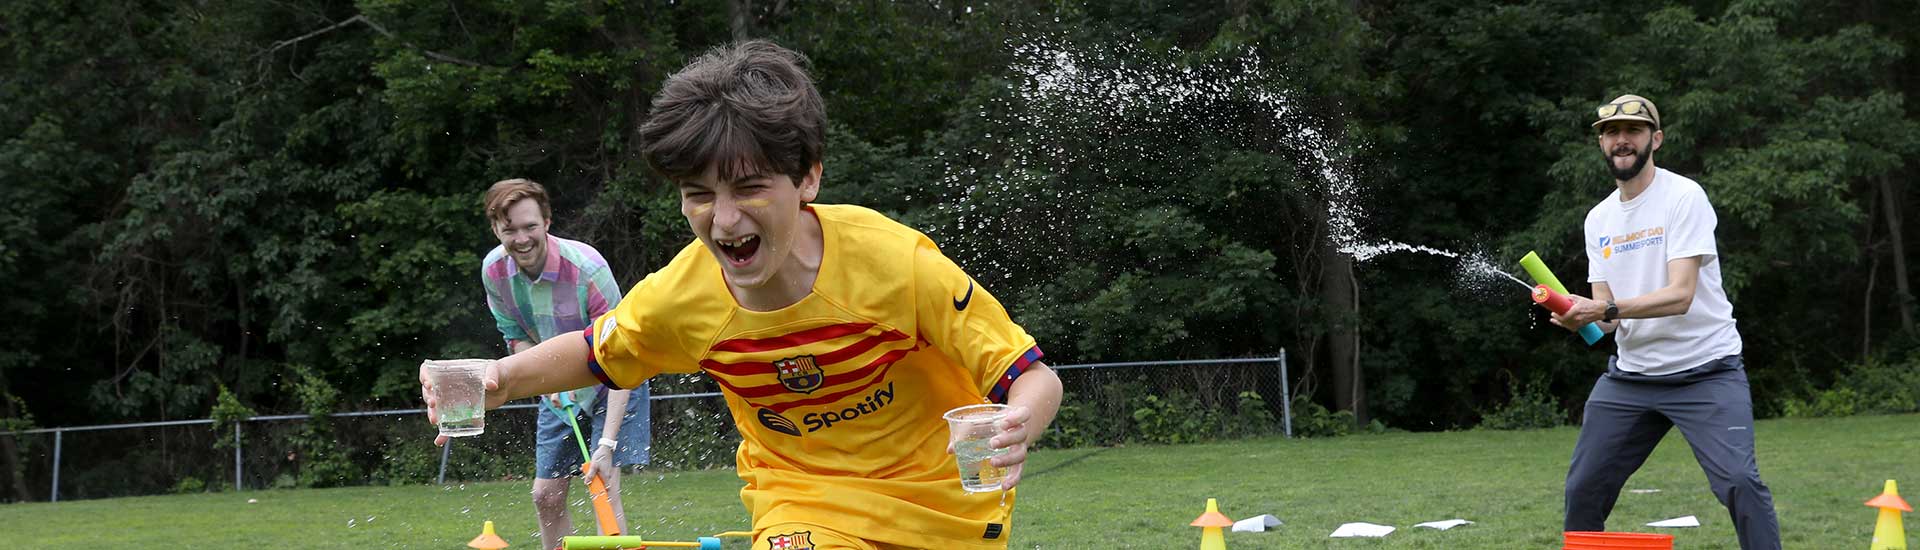 A student races past teachers with water squirters on Field Day